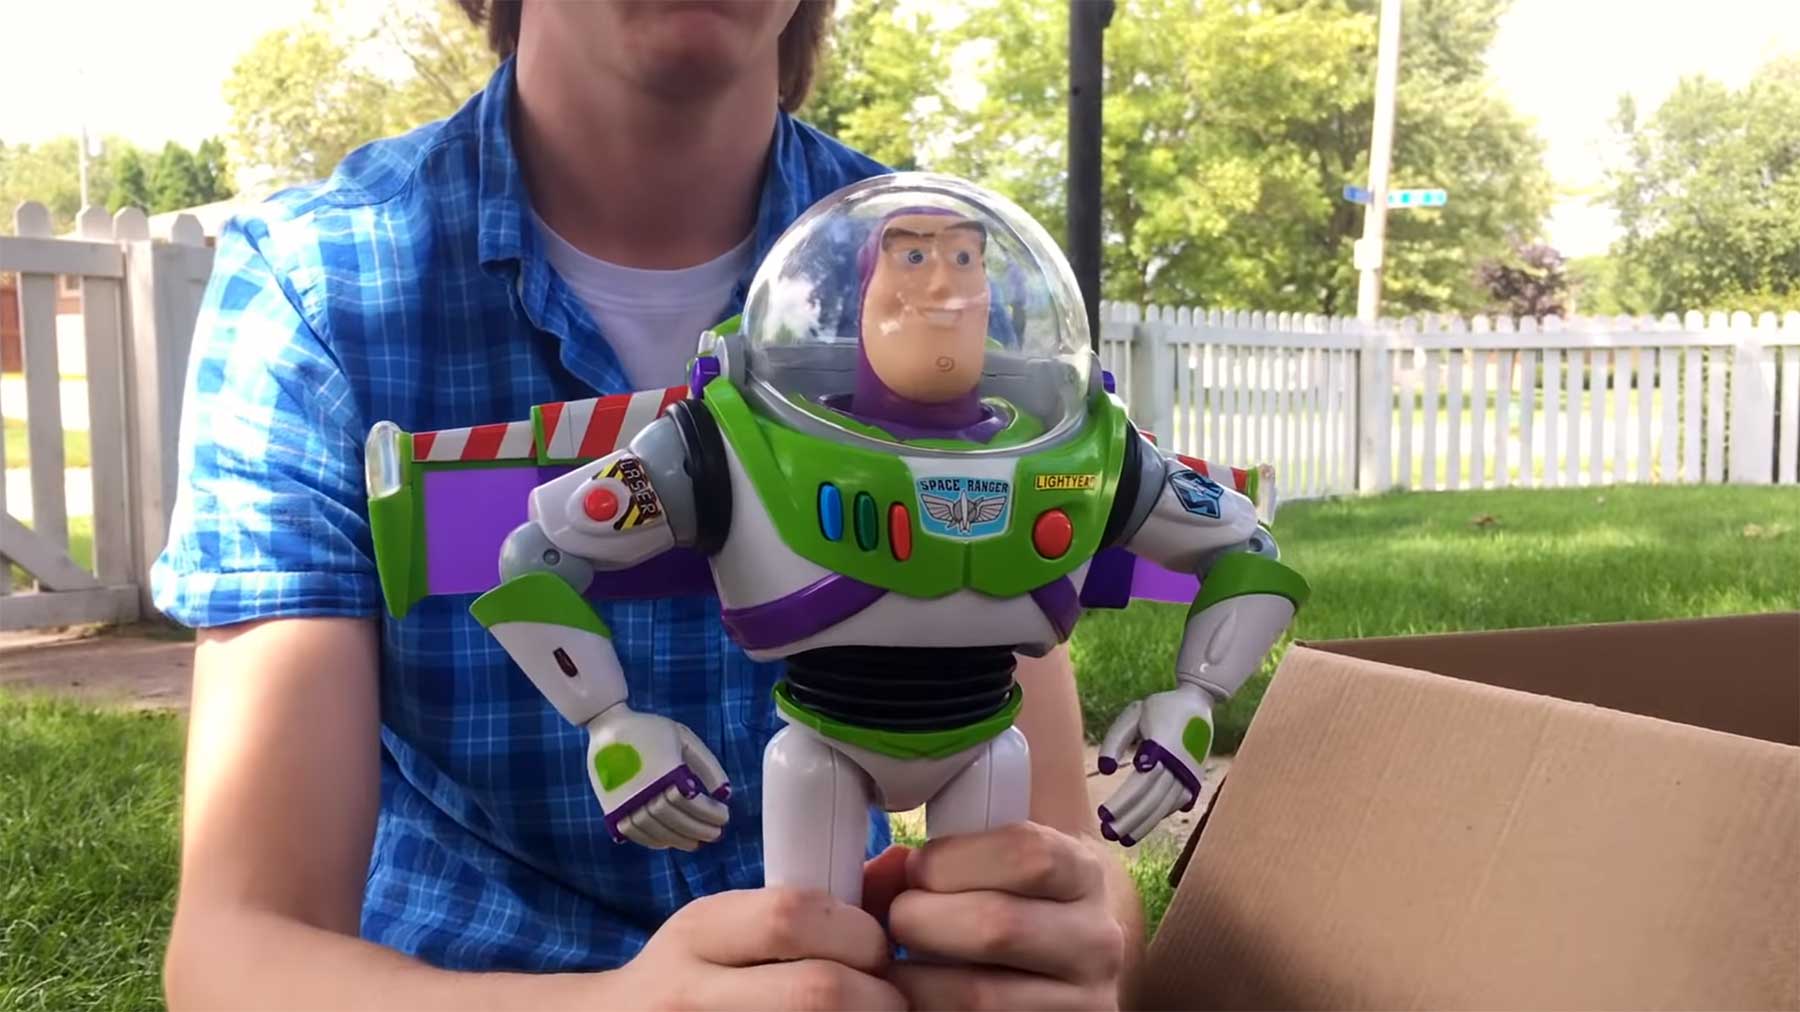 "Toy Story 3 IRL": Kompletter Film in echt nachgespielt toy-story-3-irl-real-life-version-1 